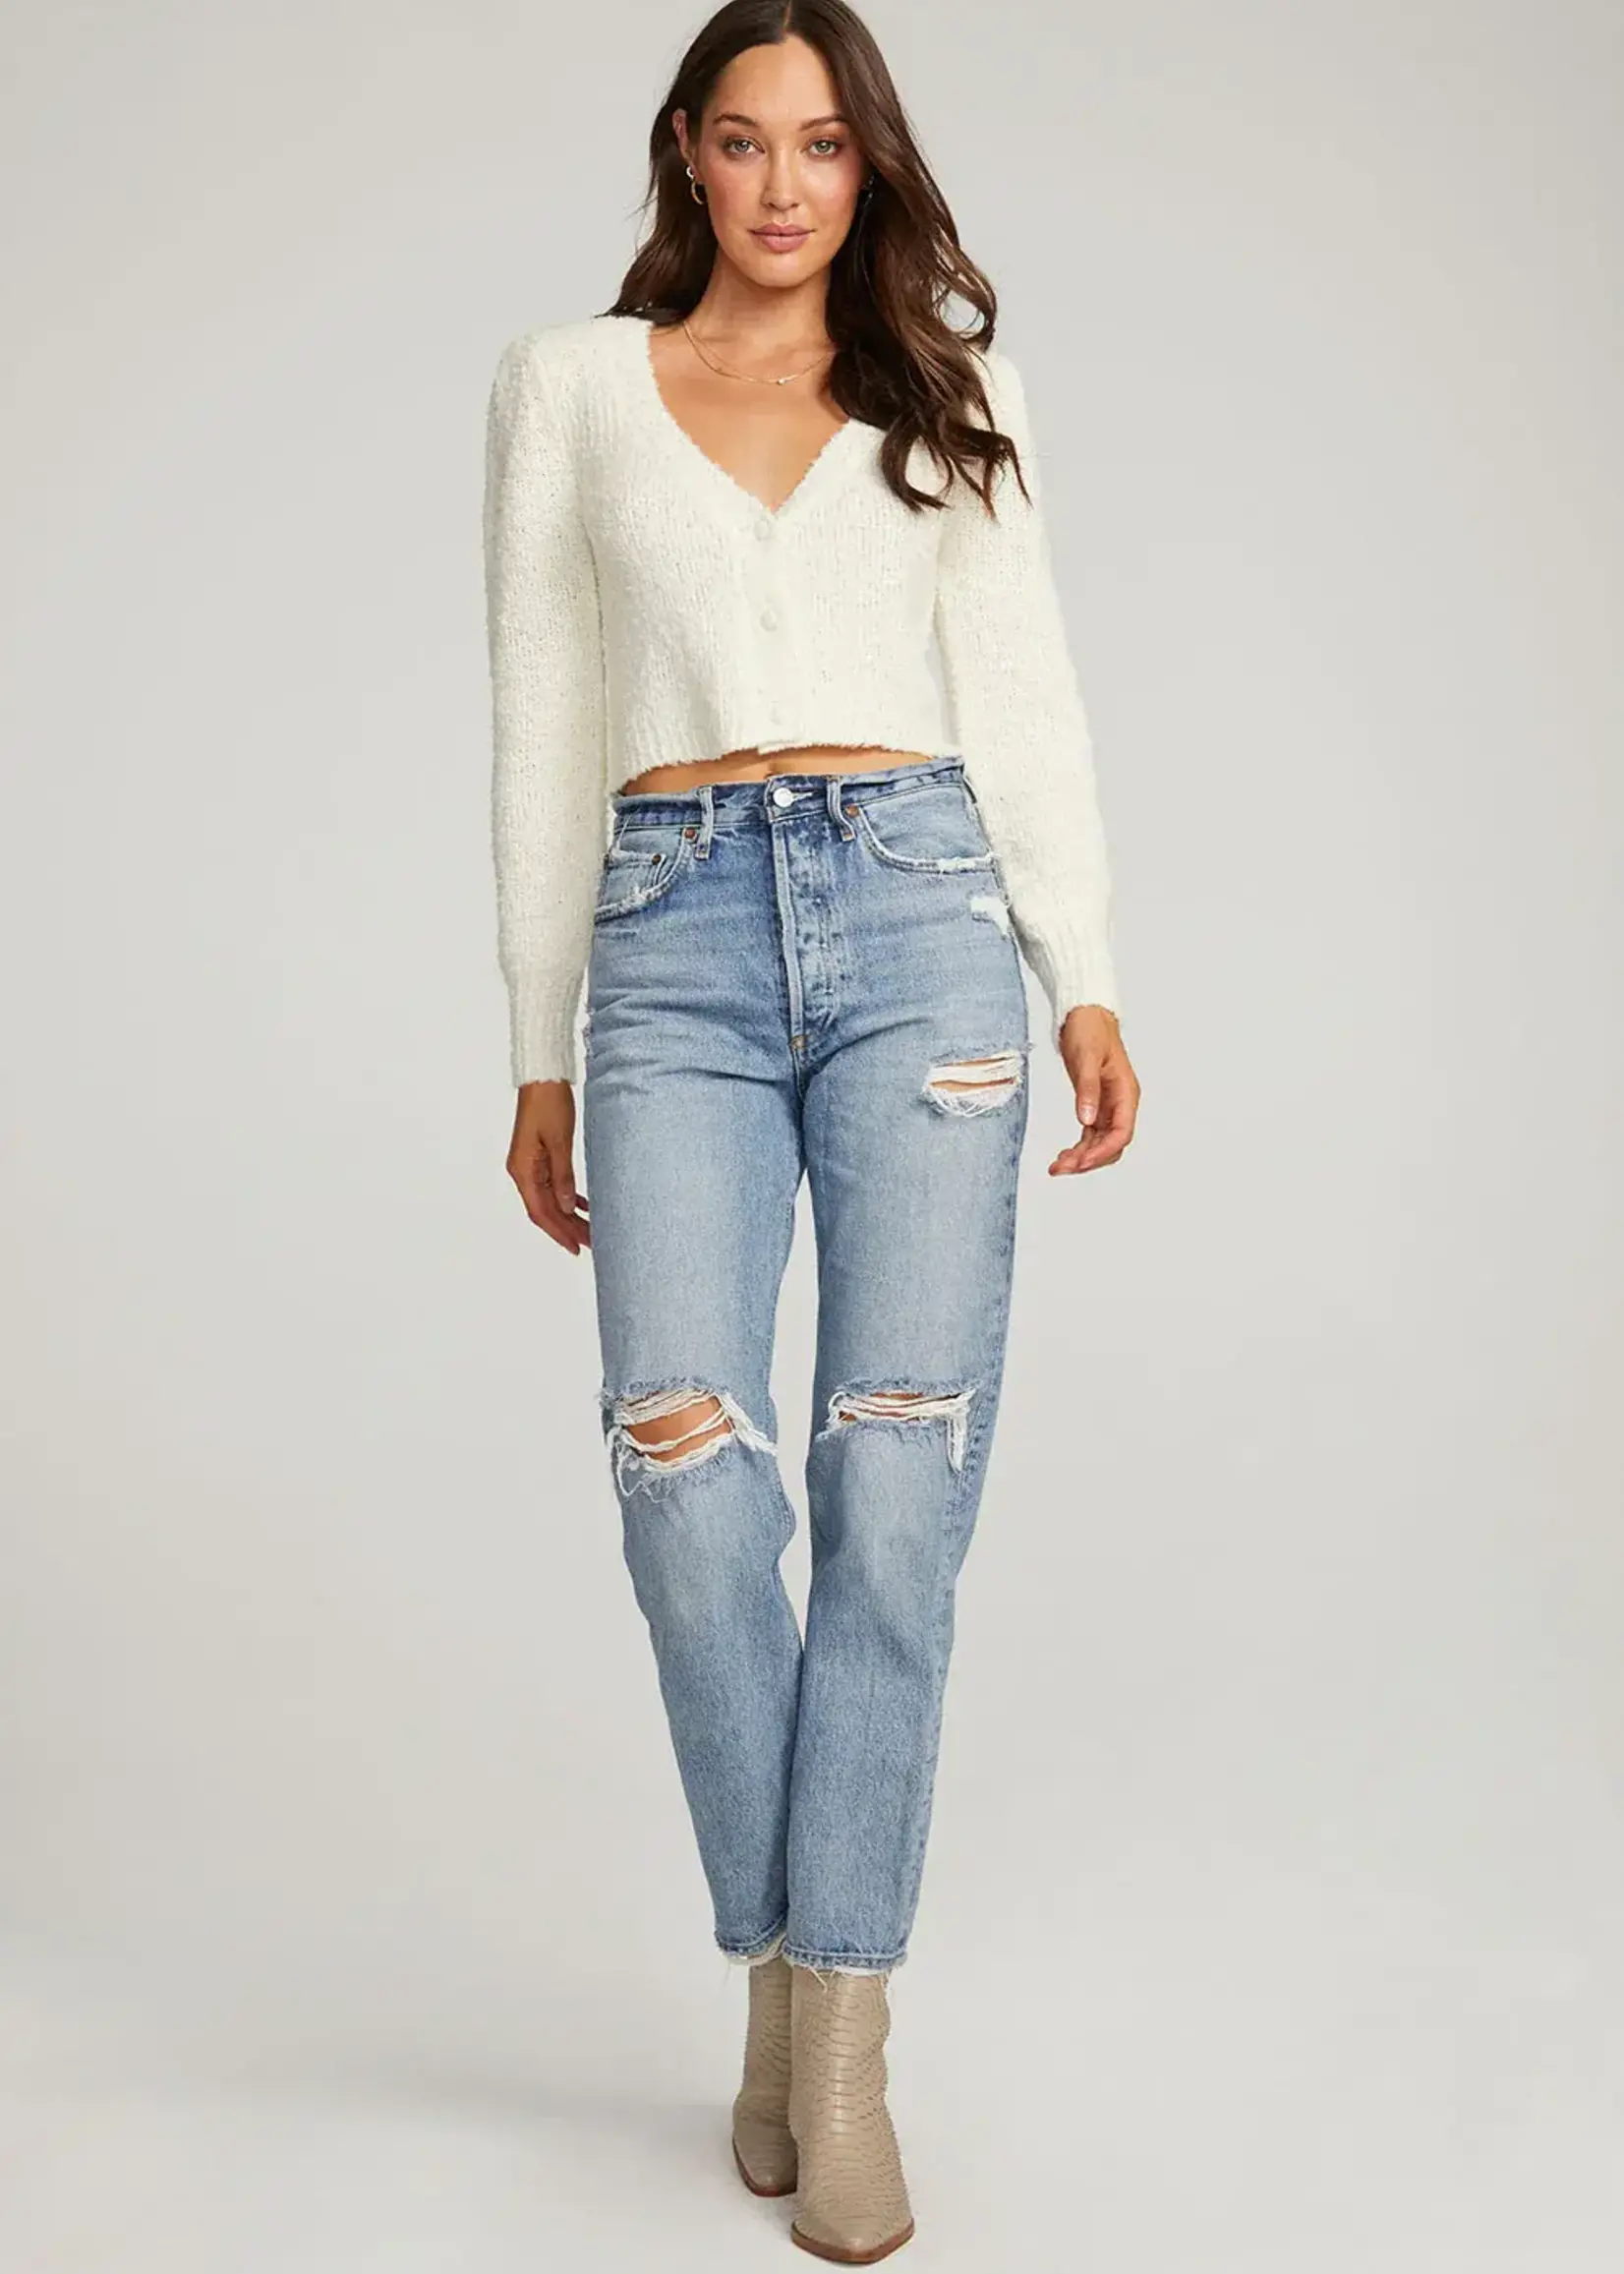 SALTWATER LUXE Trula Sweater